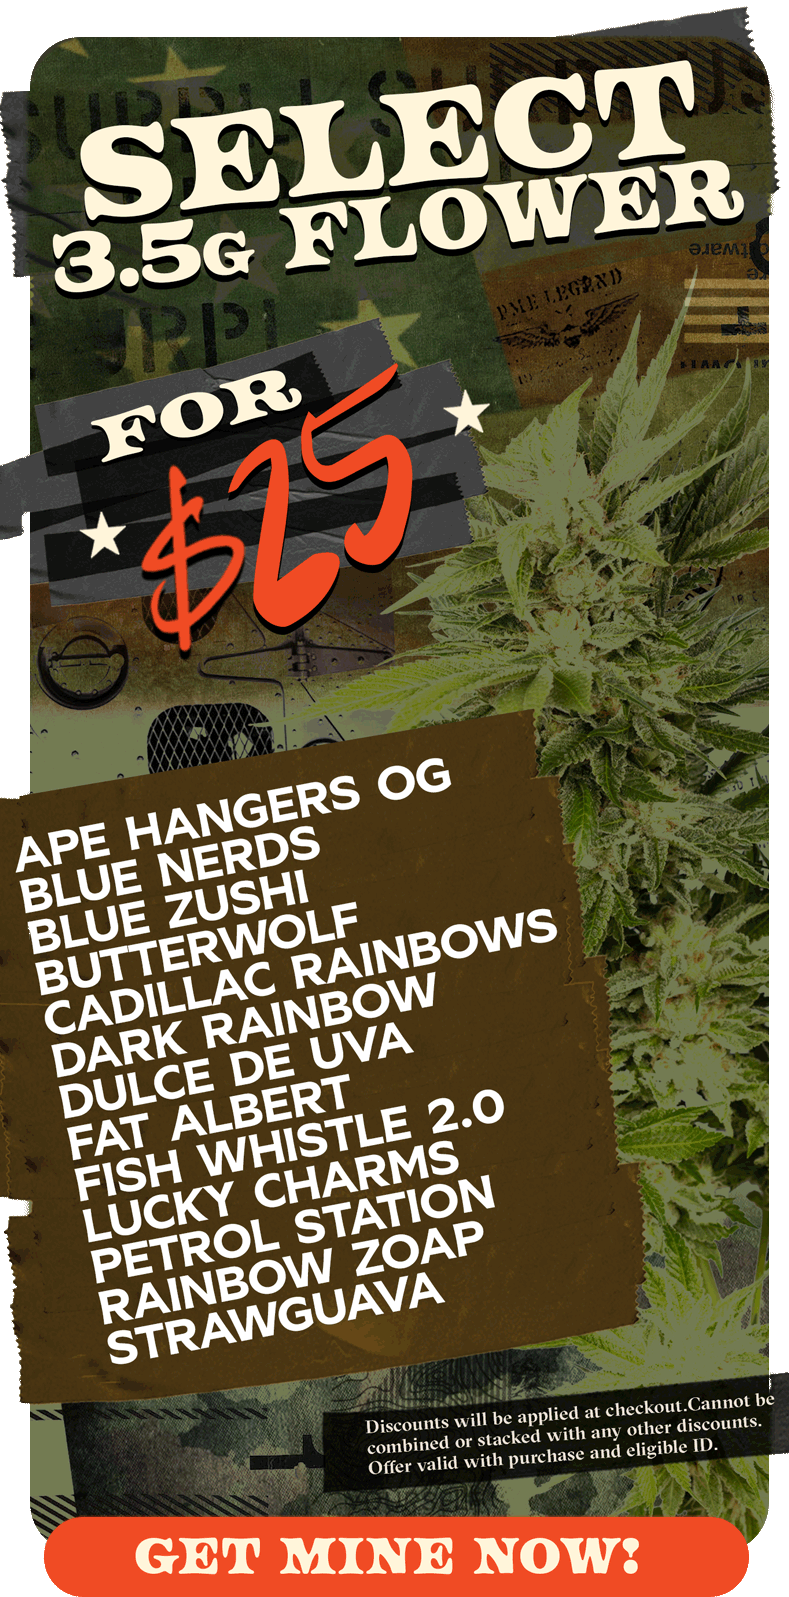 Select T1 3.5Flower For $25 ArmedForces Blank